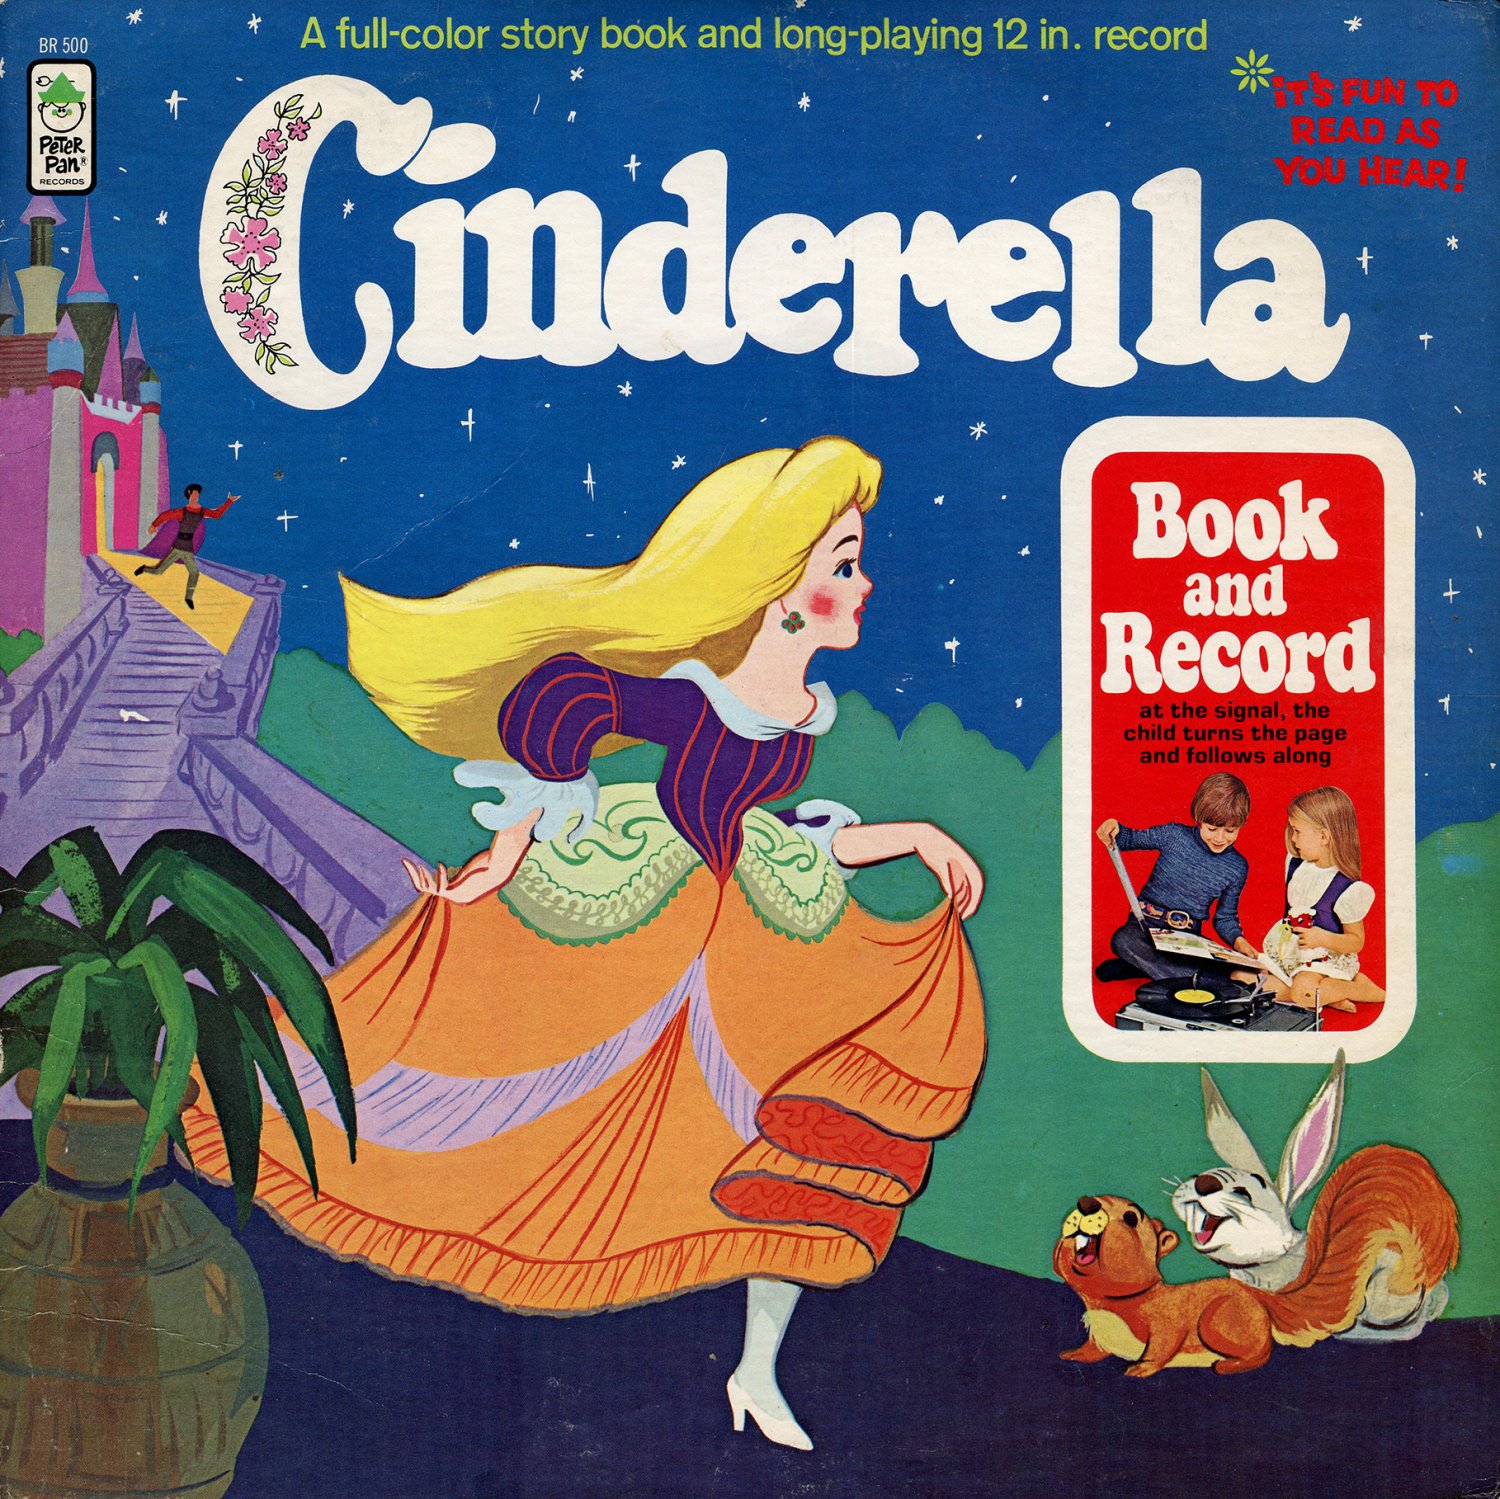 Cinderella Book and Record by Peter Pan Books